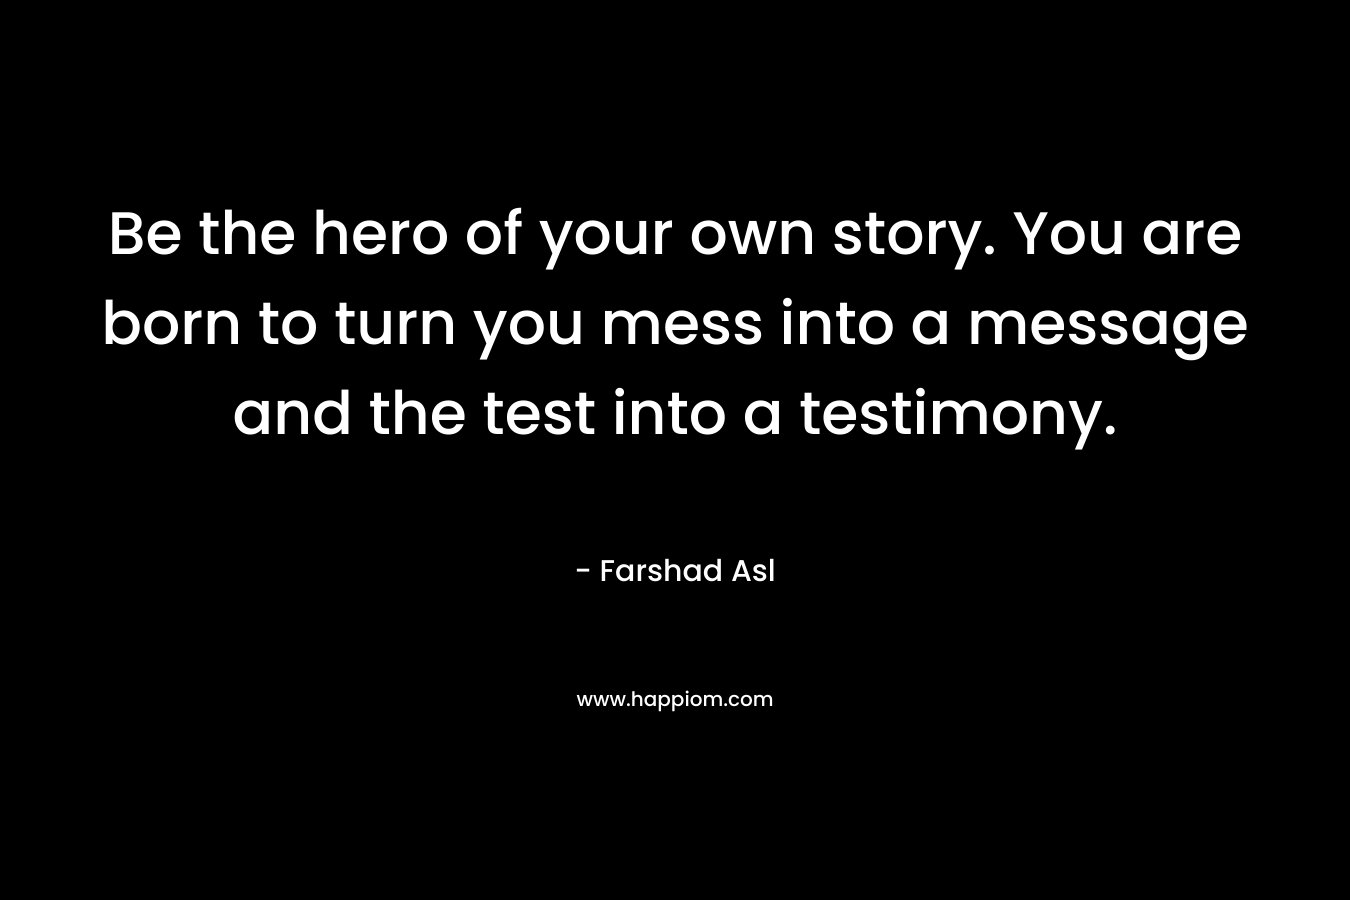 Be the hero of your own story. You are born to turn you mess into a message and the test into a testimony. – Farshad Asl